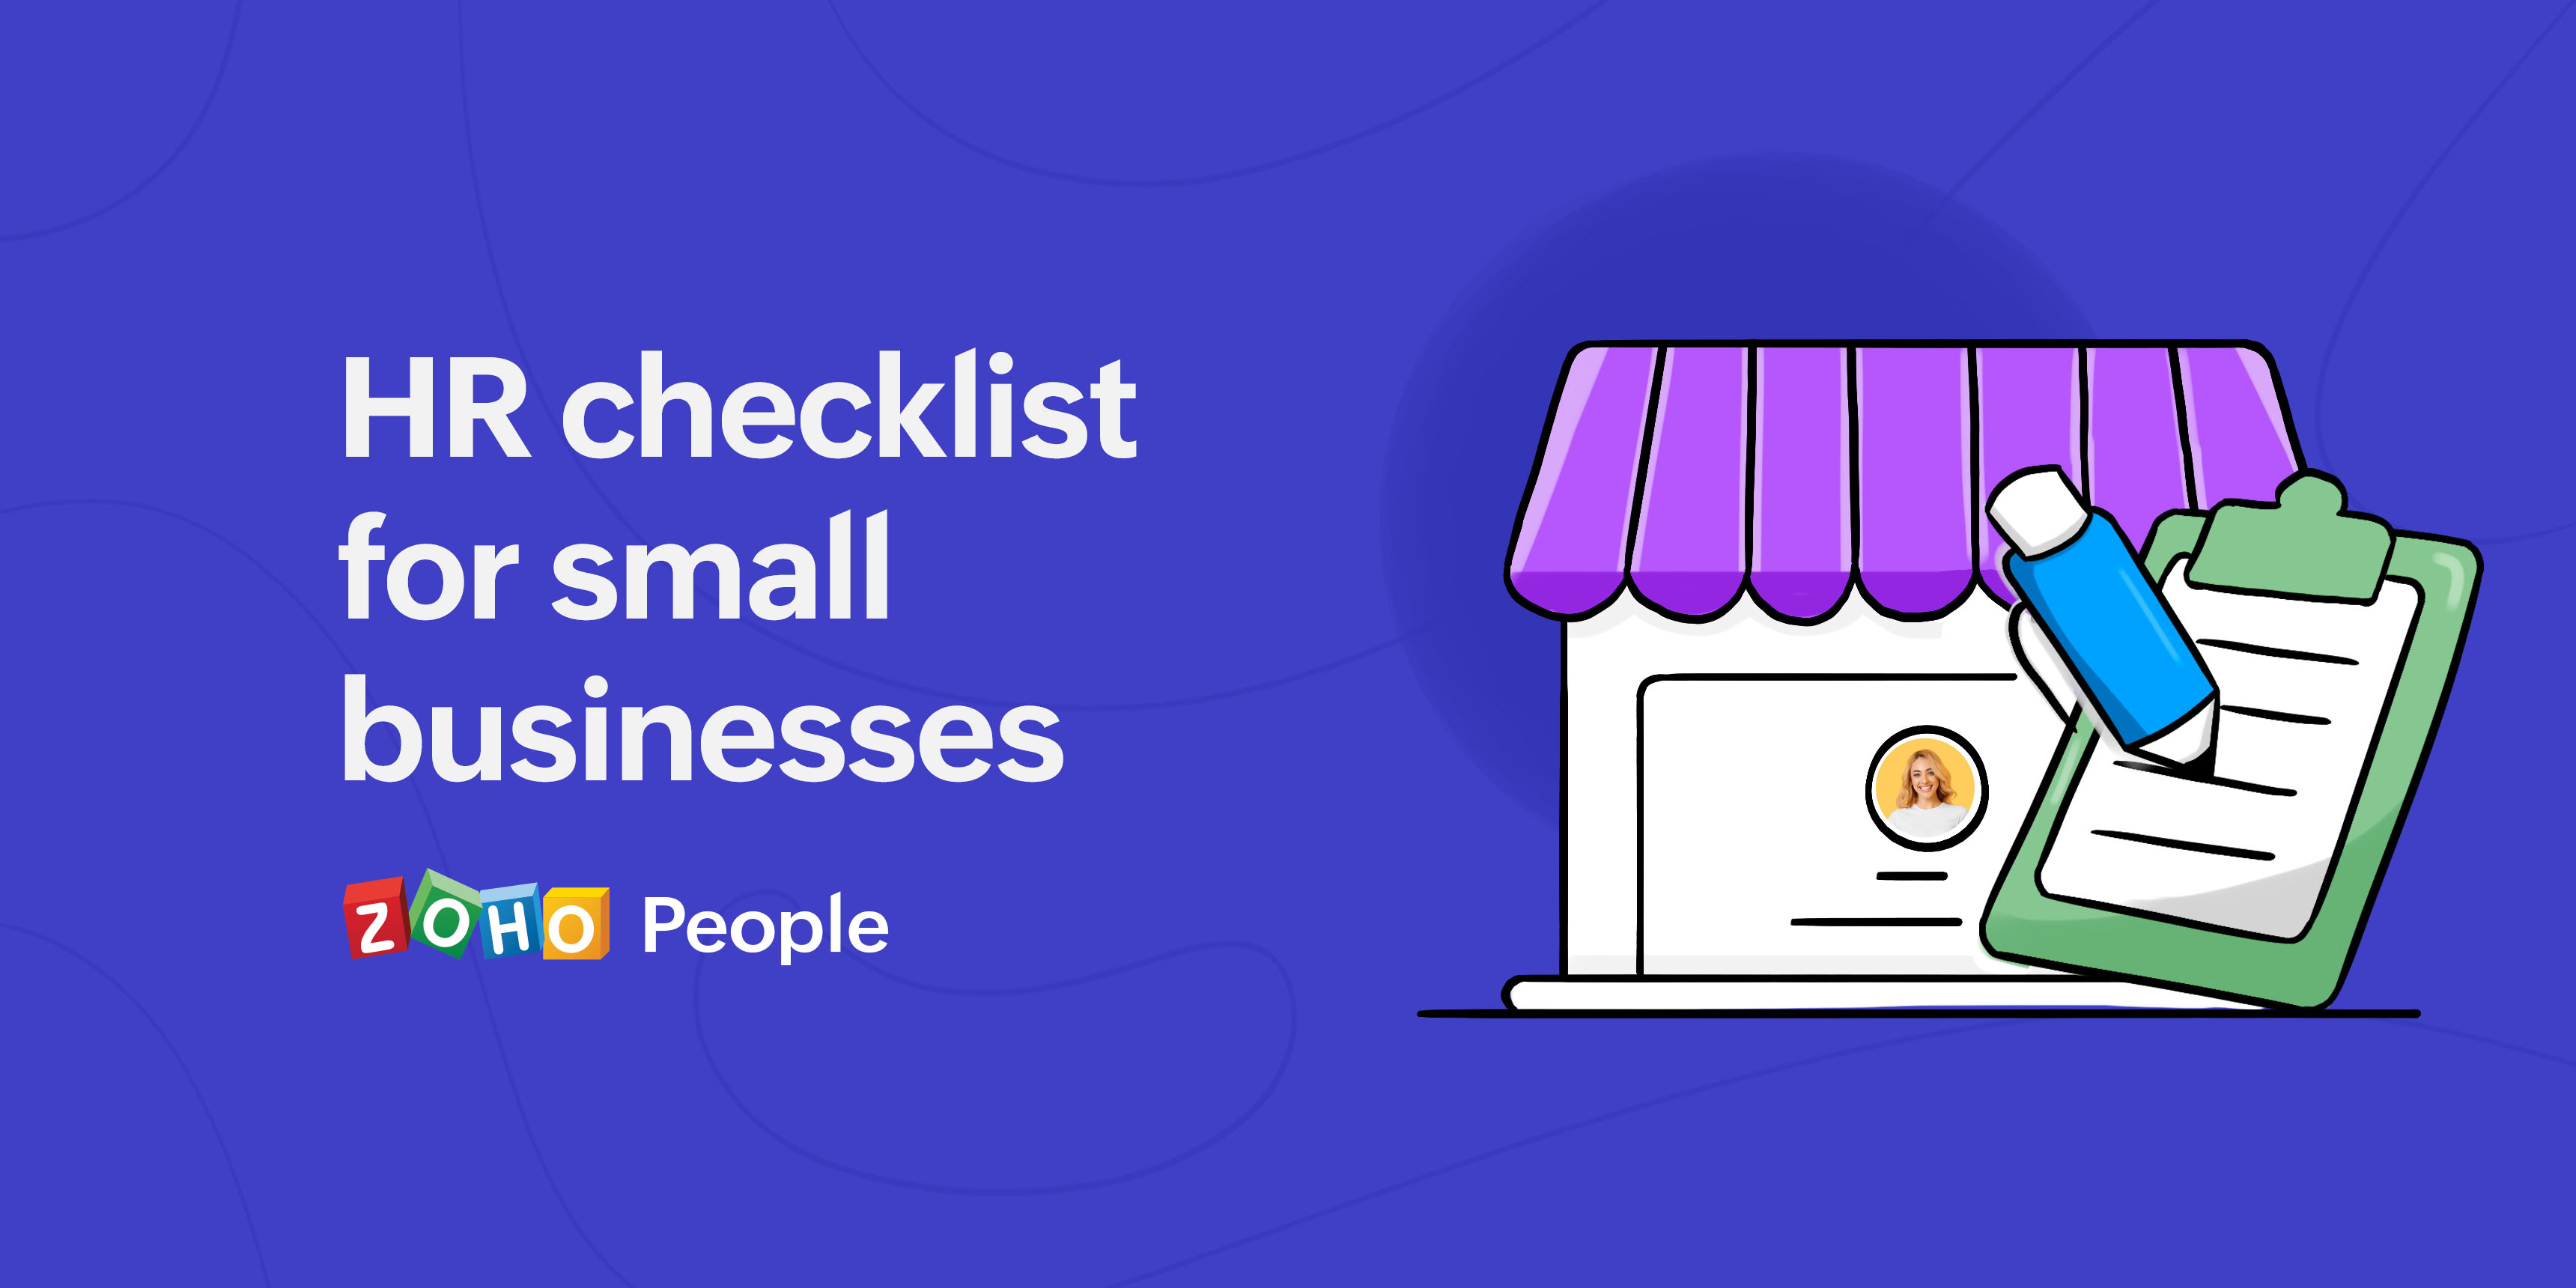 The complete HR checklist for small businesses and start-ups